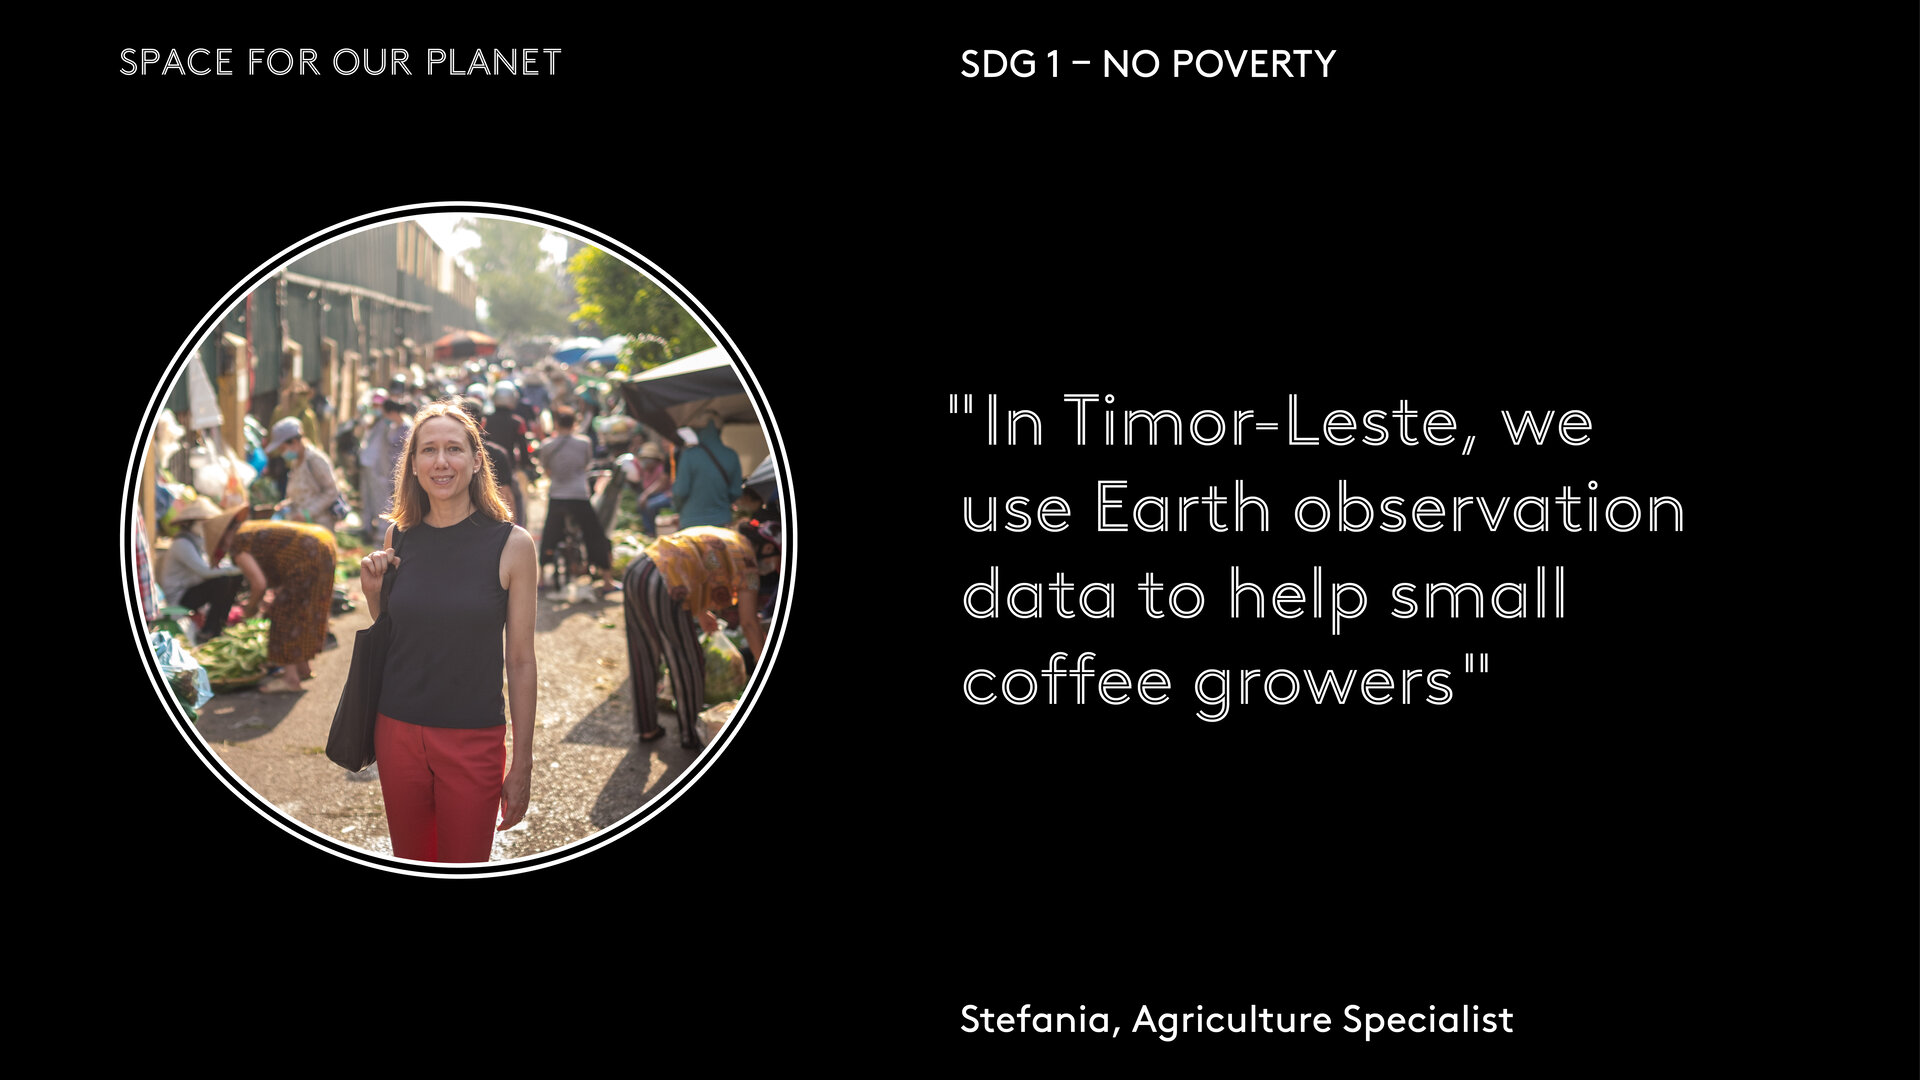 "In Timor-Leste, we use Earth observation data to help small coffee growers"